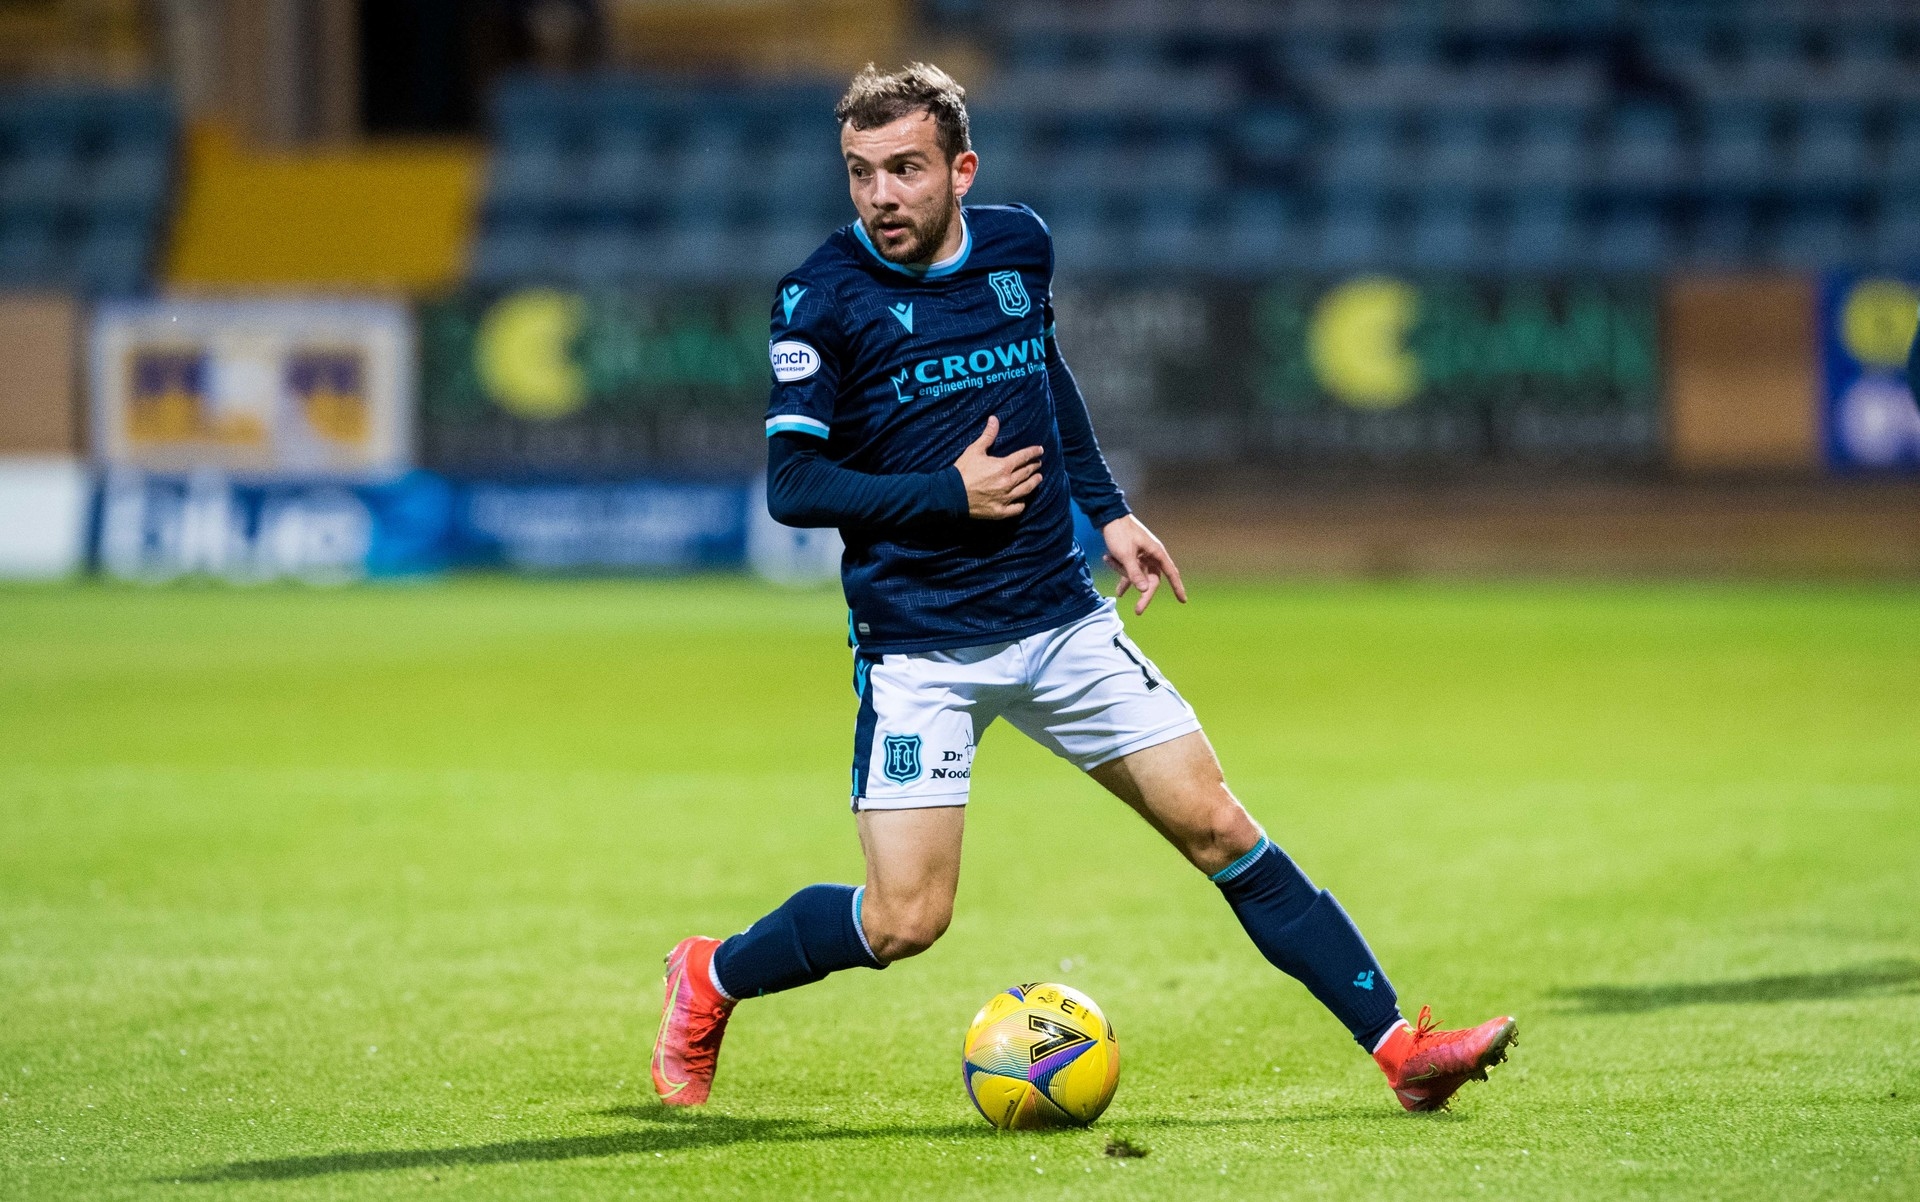 Paul McMullan stars for Dundee in the Scottish Premiership.